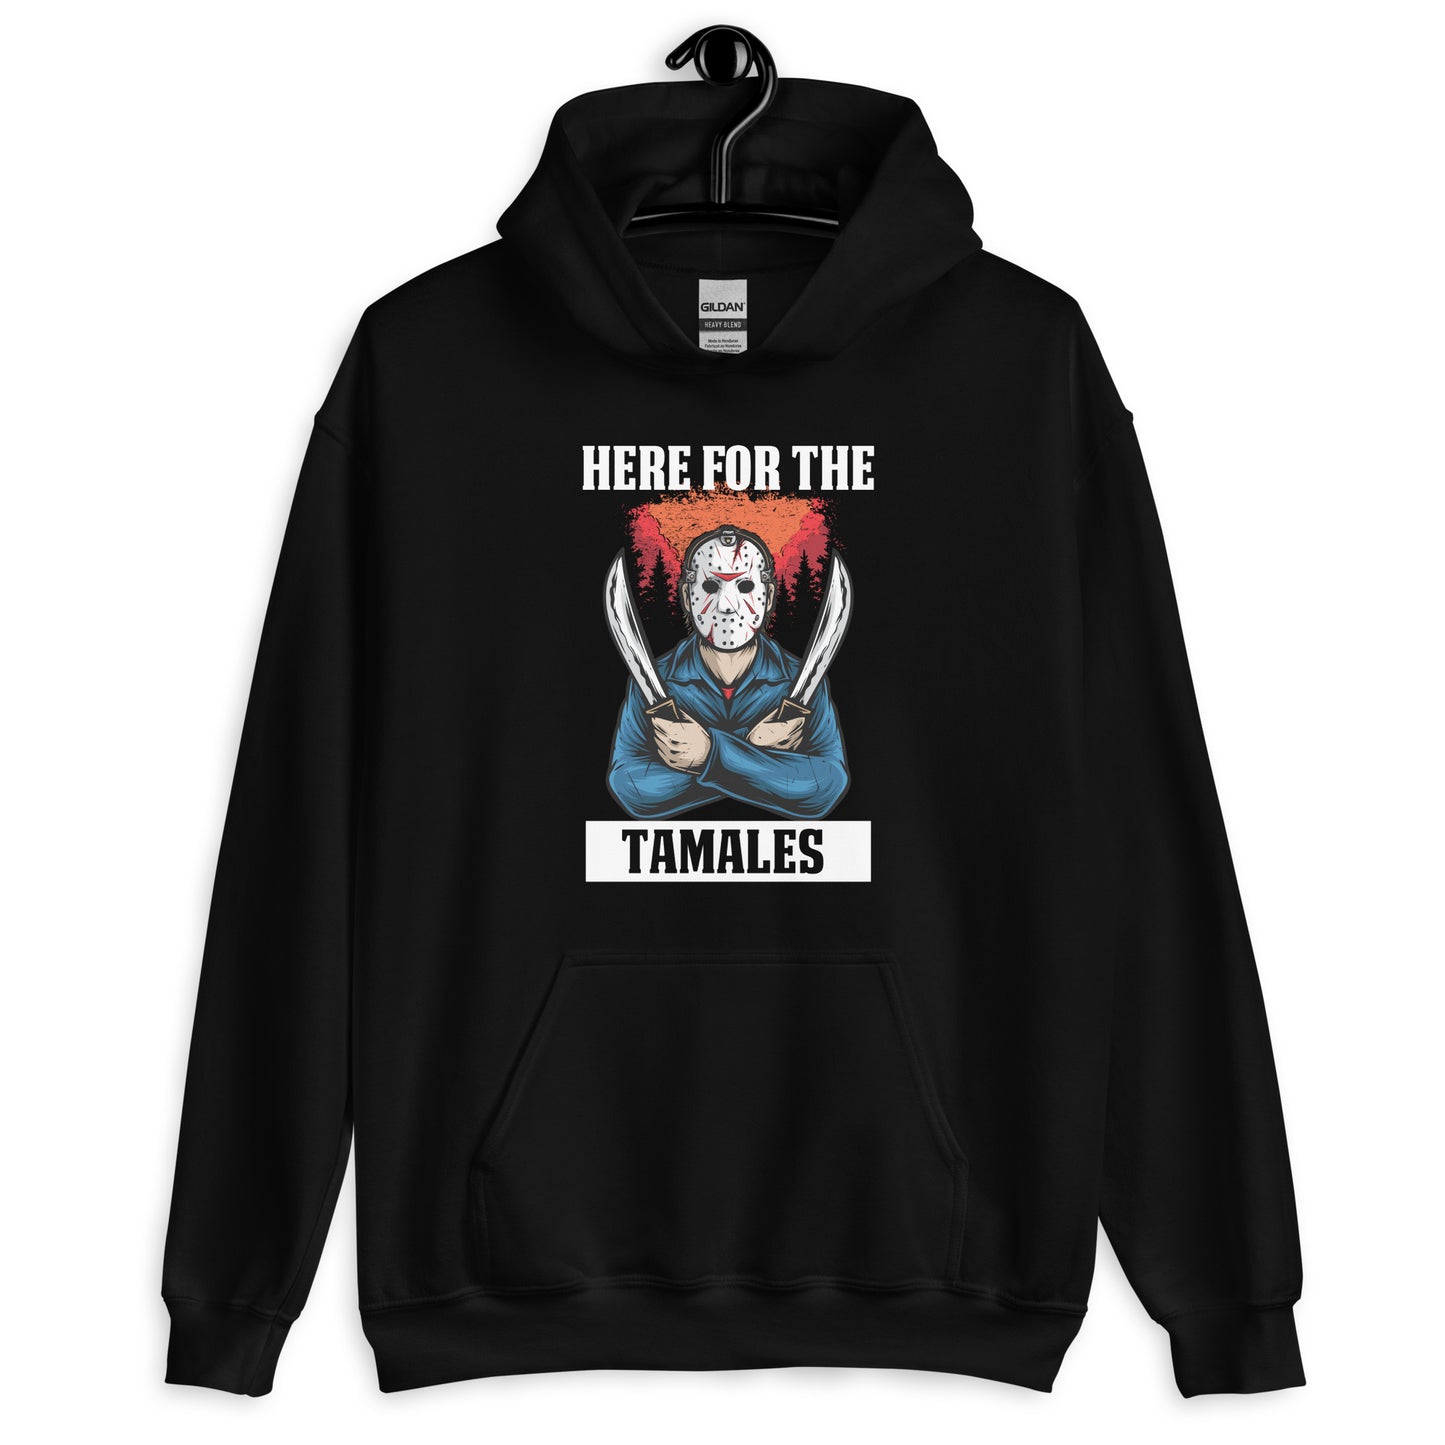 Here for the Tamales Hoodie